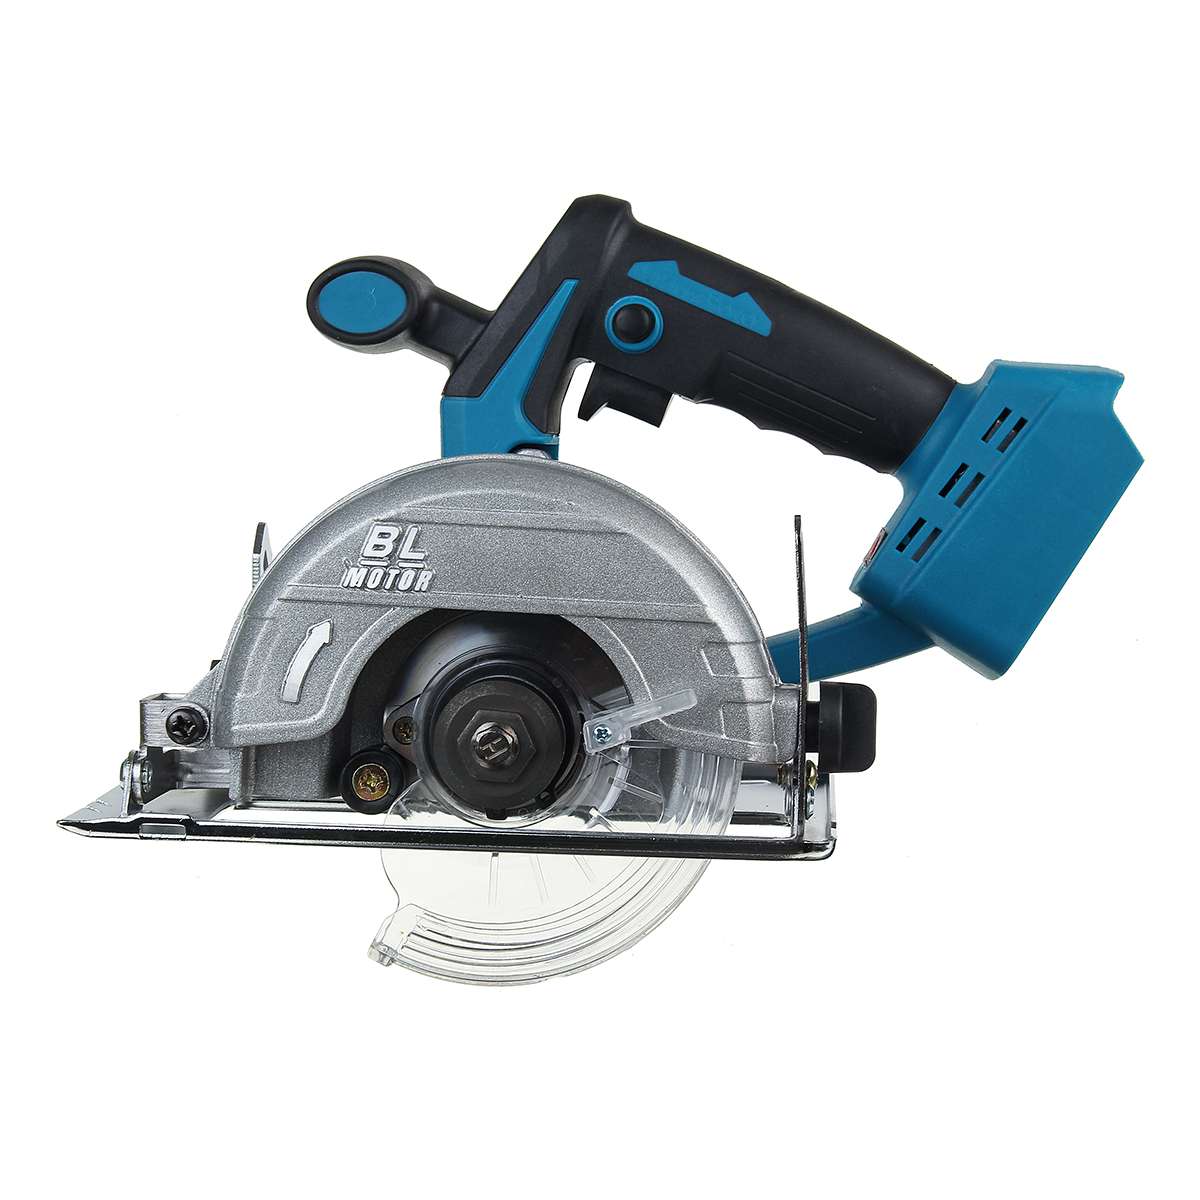 10800RPM 125mm Cordless Electric Wood Circular Saw Power Tools Dust Passage Multifunction Cutting Machine For 18V Makita Battery